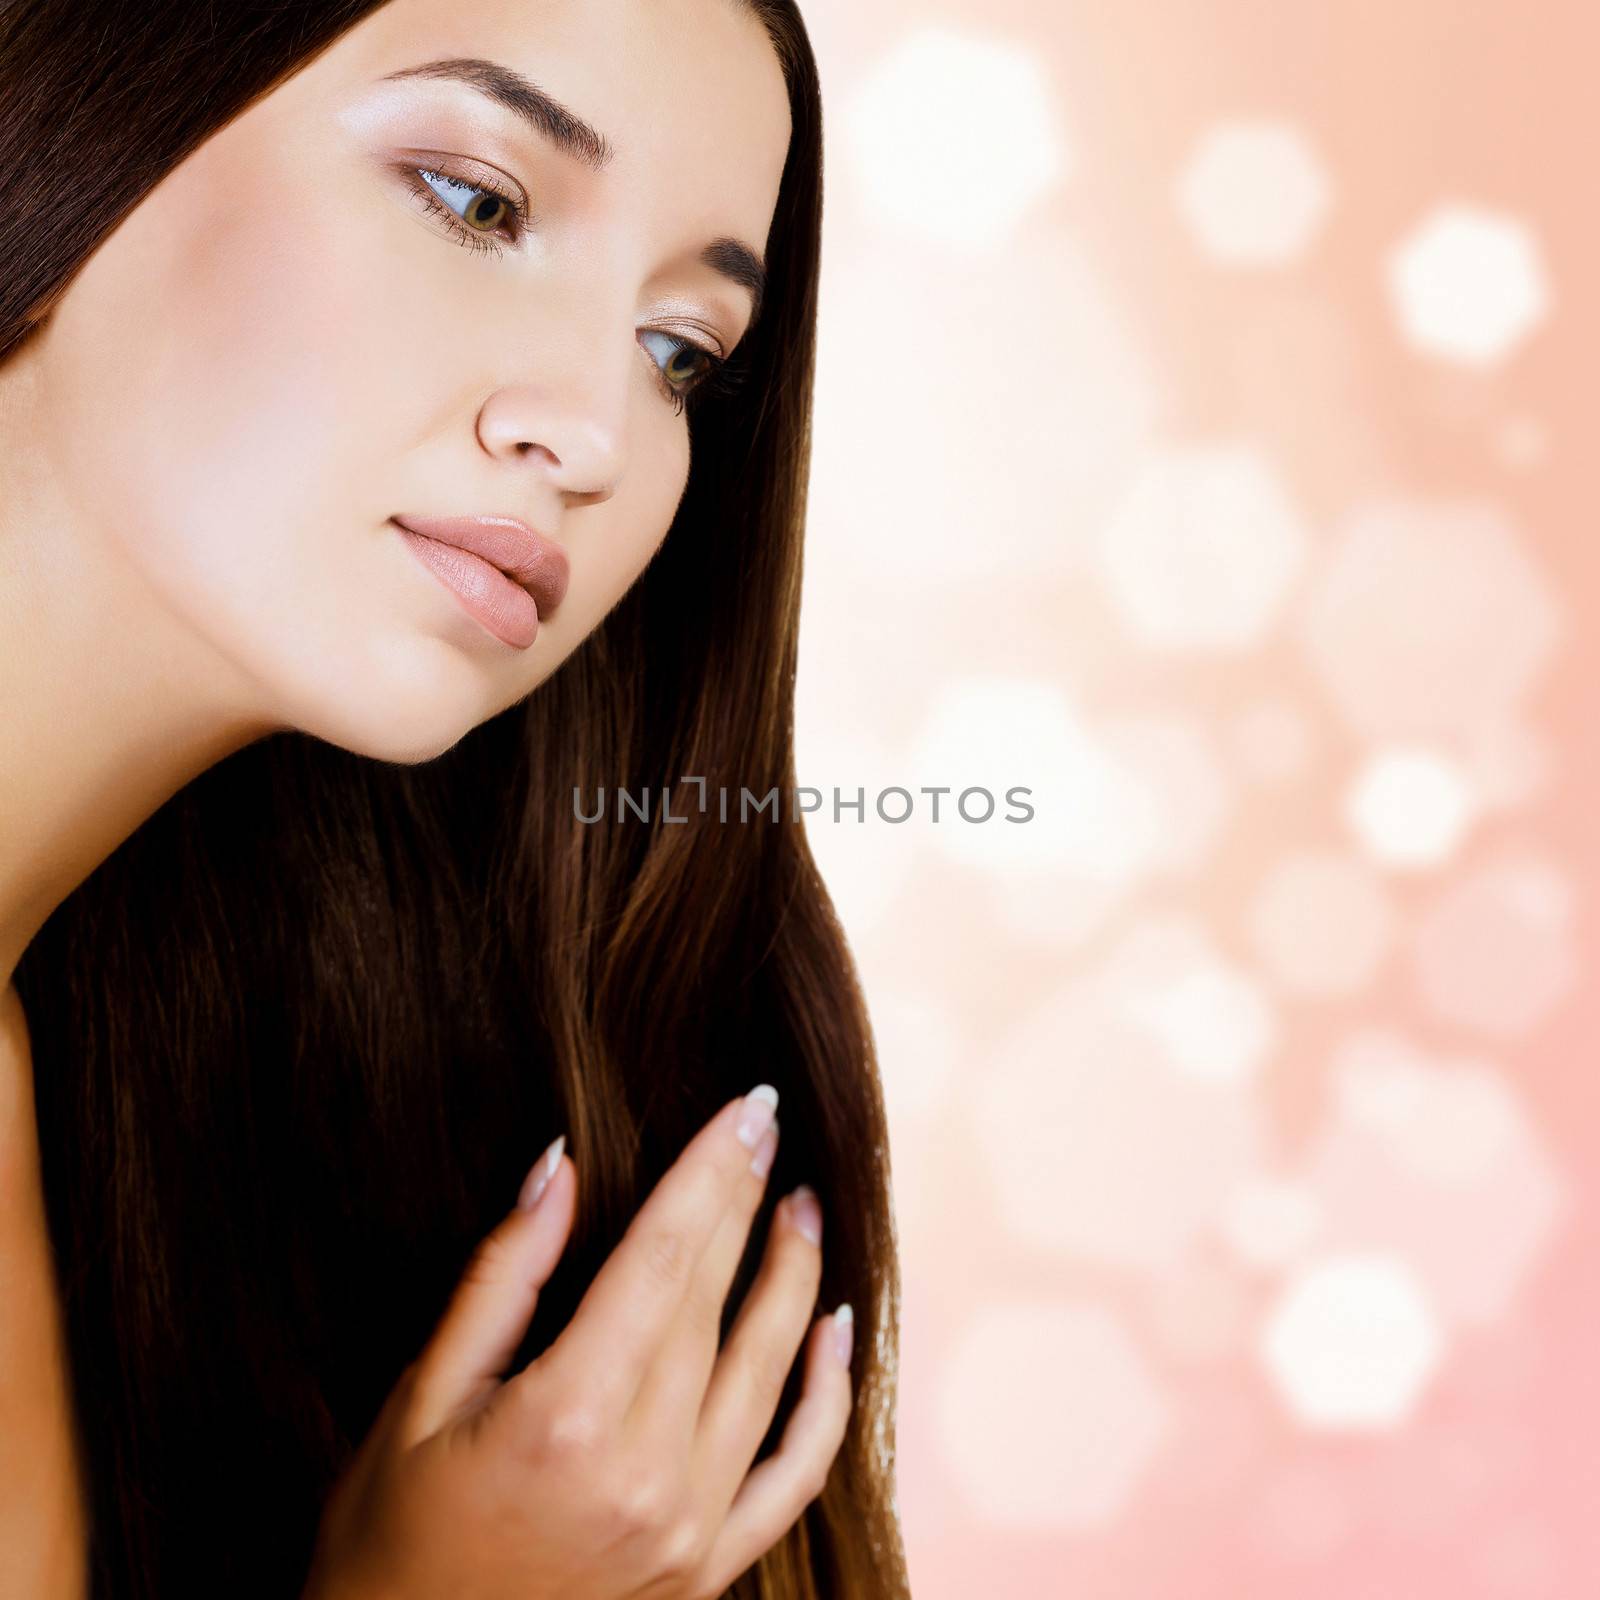 woman with long dark hair, blurred background